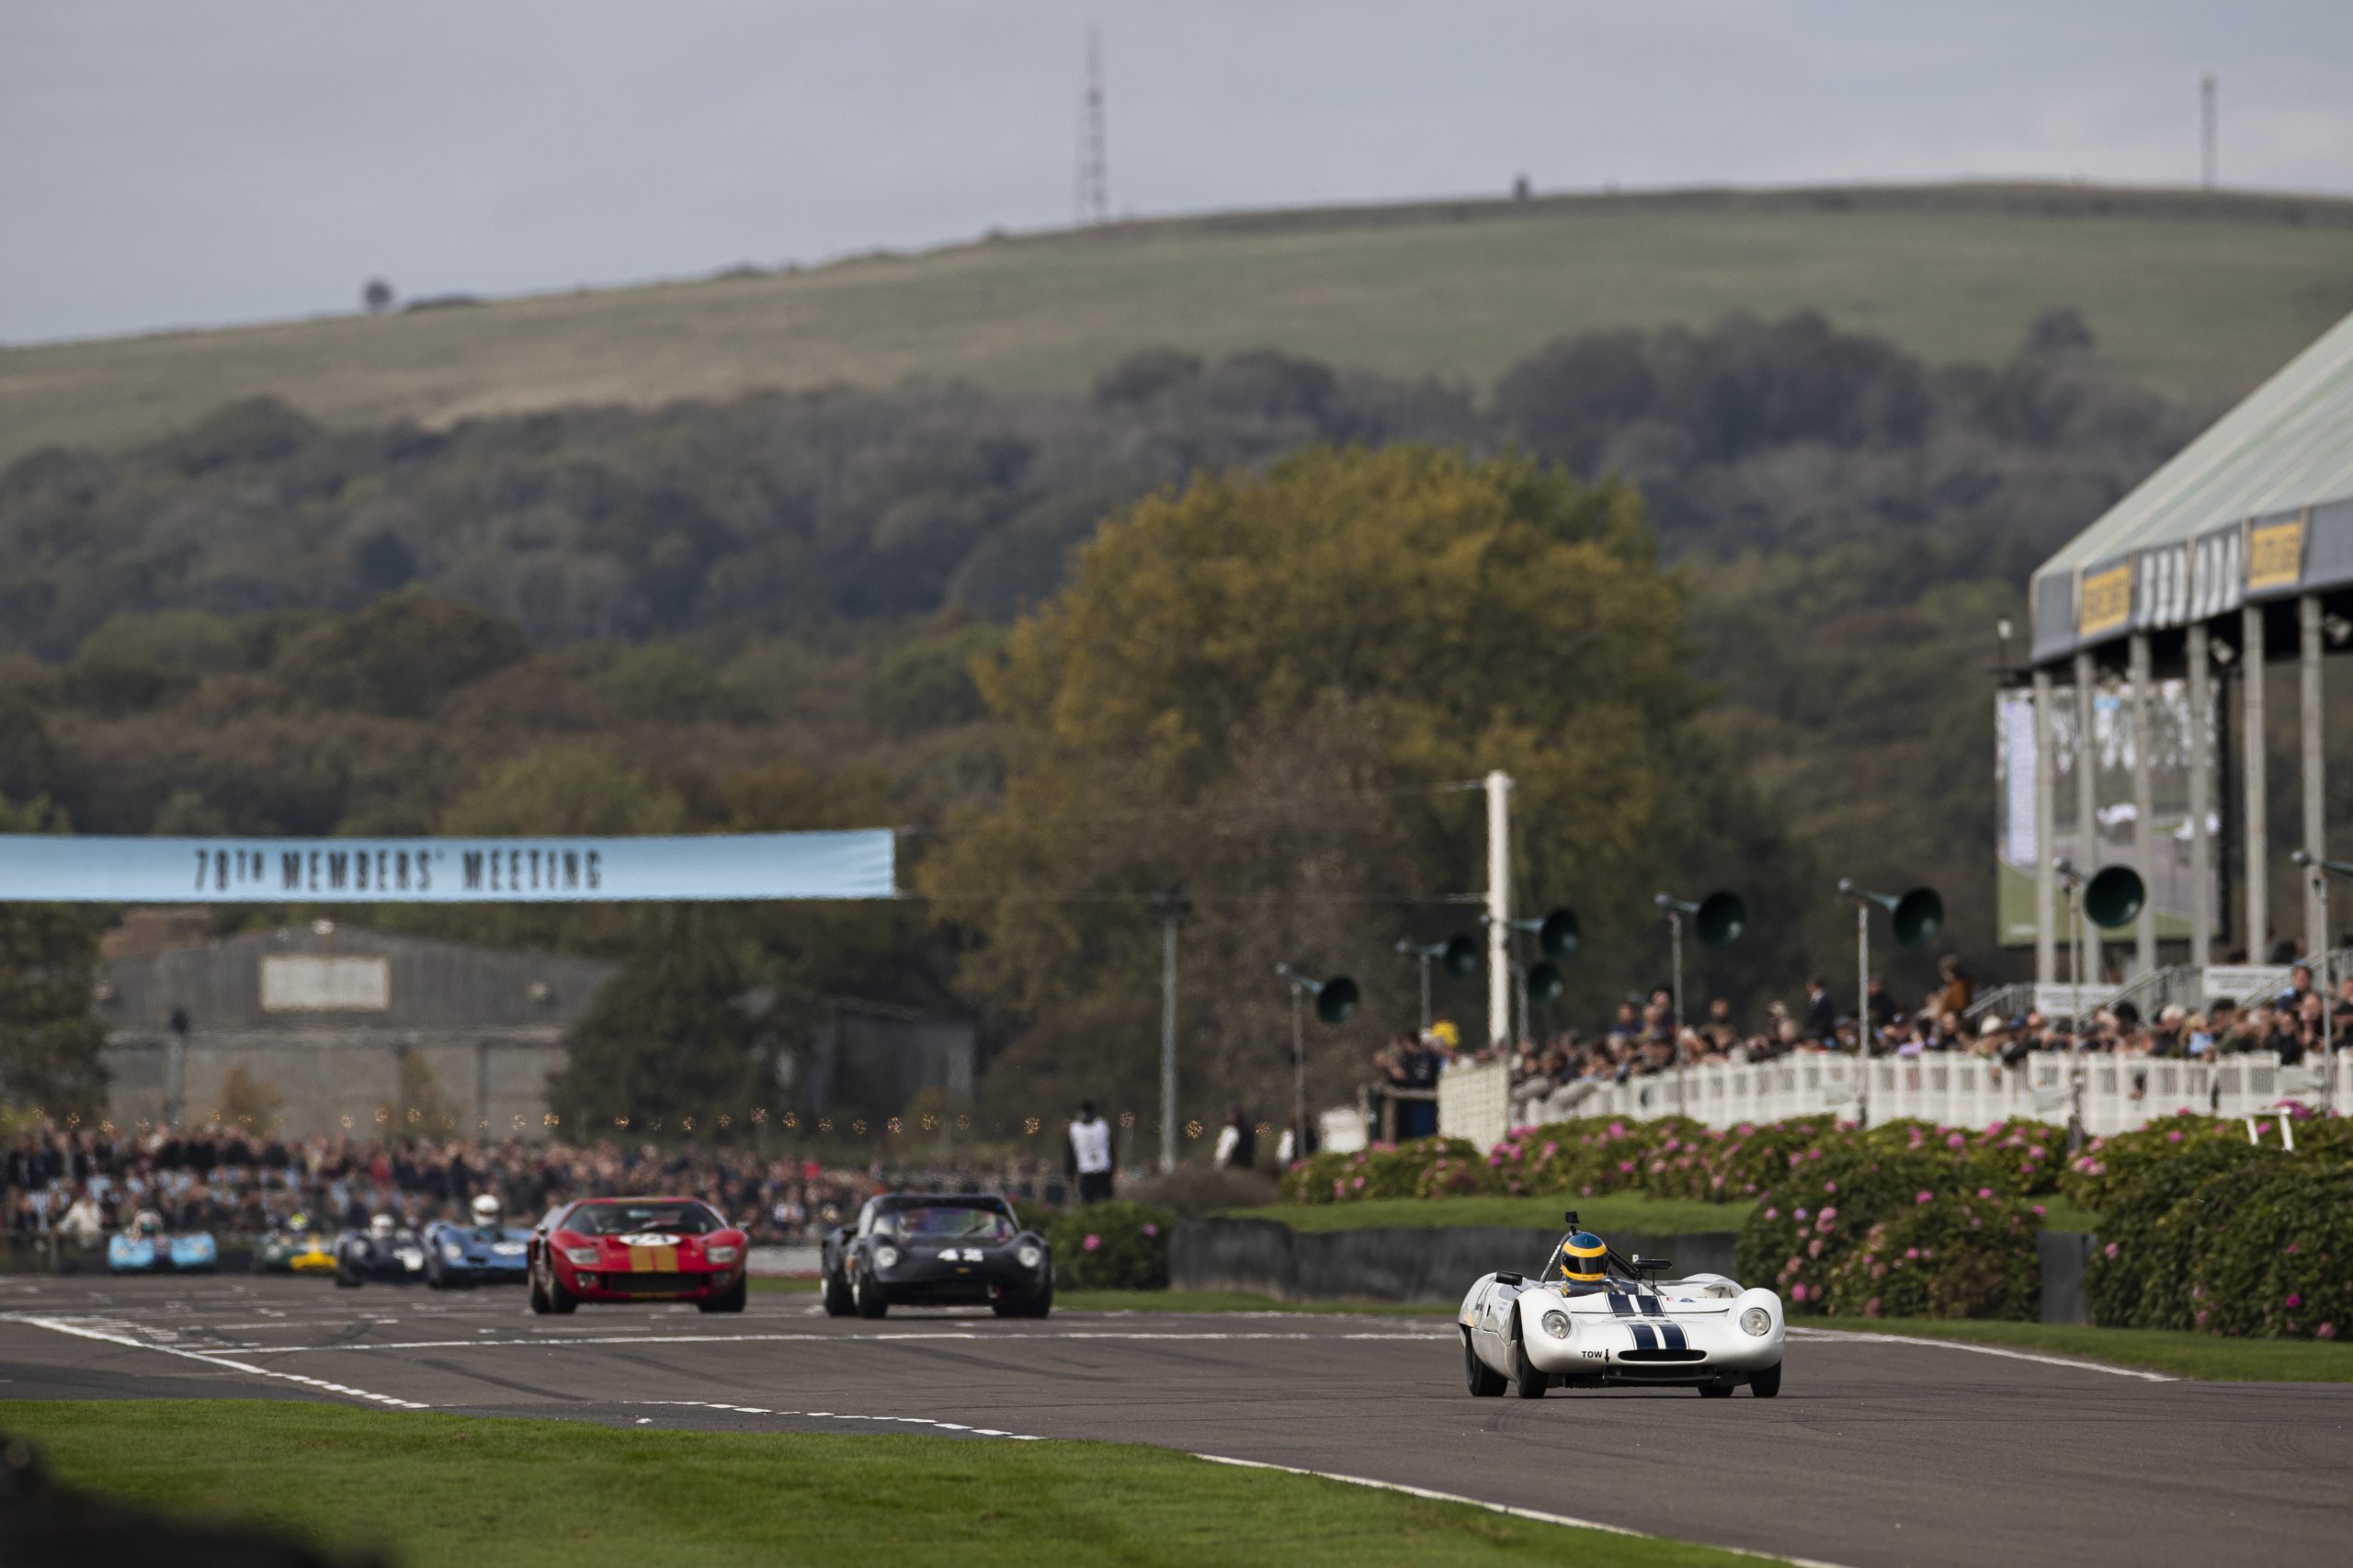 Race action from the Goodwood Members Meeting